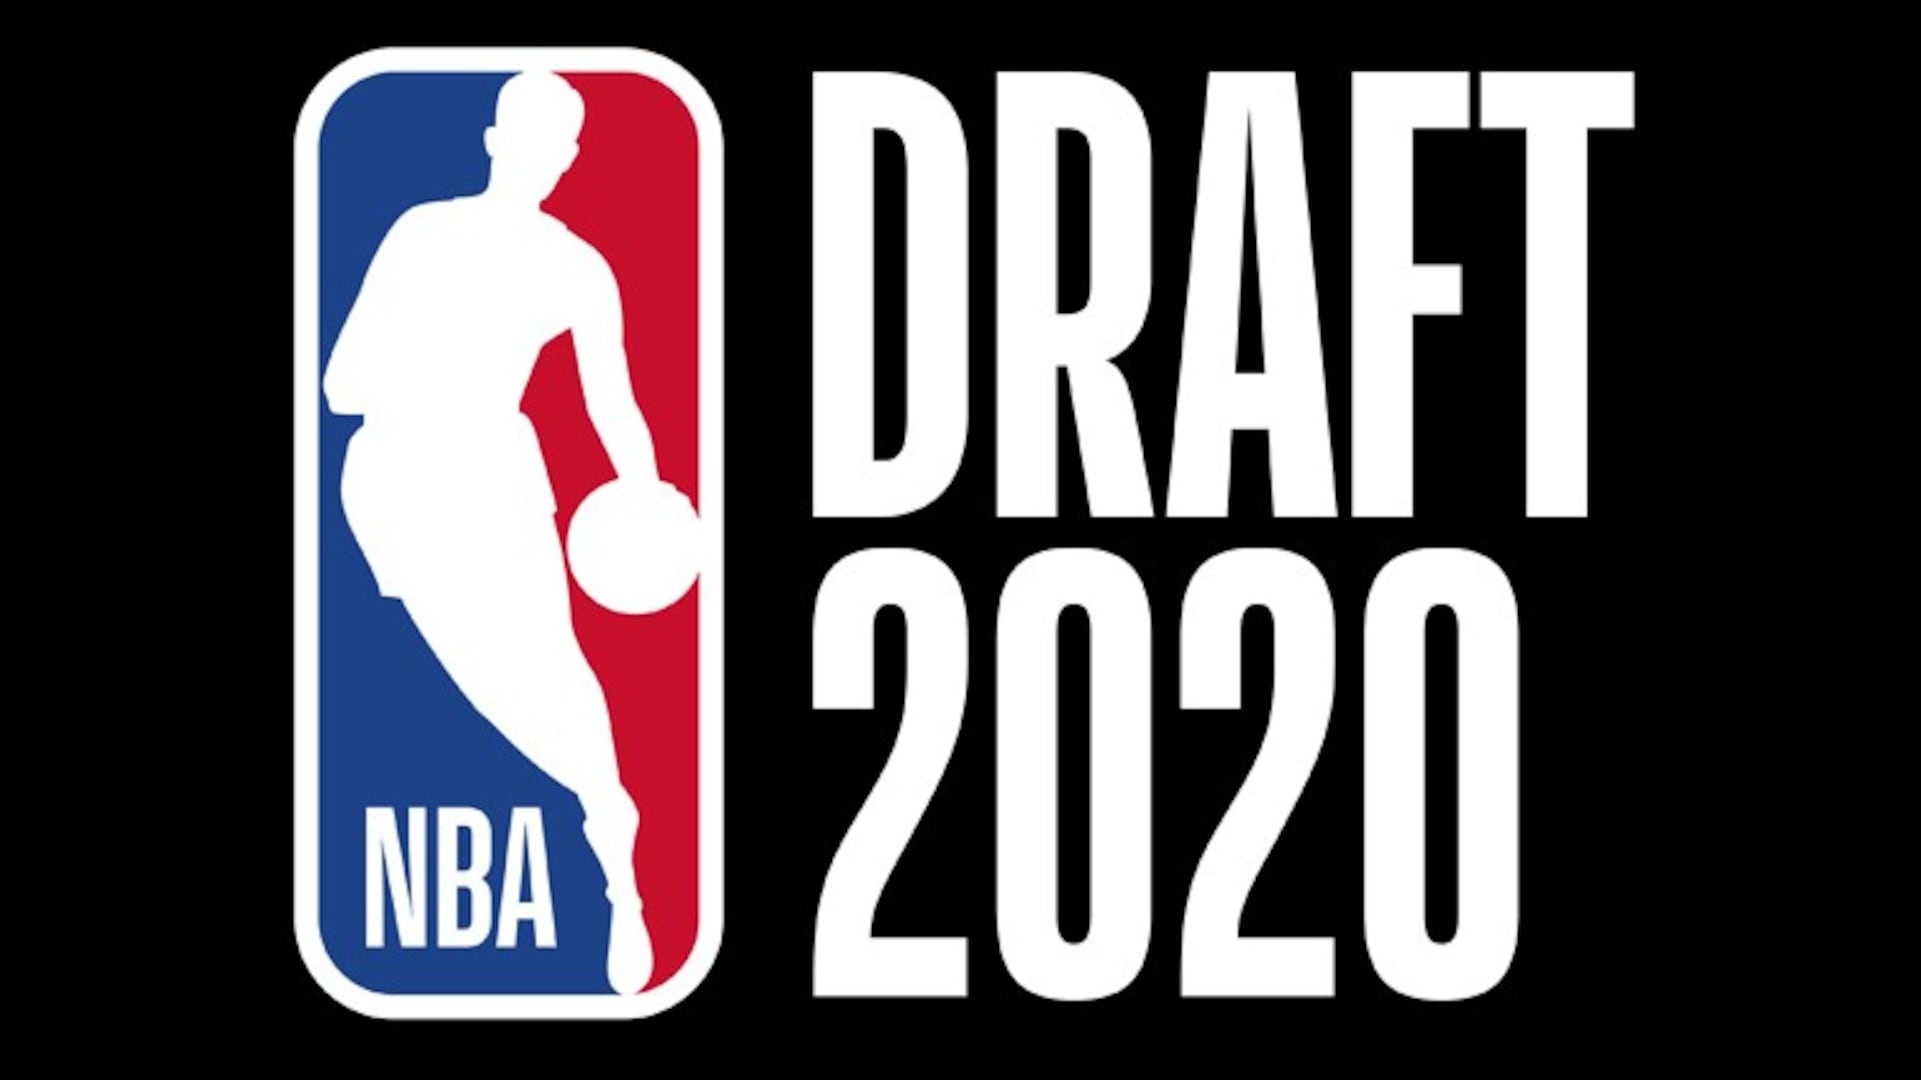 NBA draft order, Selection priority, Competitive rankings, Future prospects, 1930x1080 HD Desktop